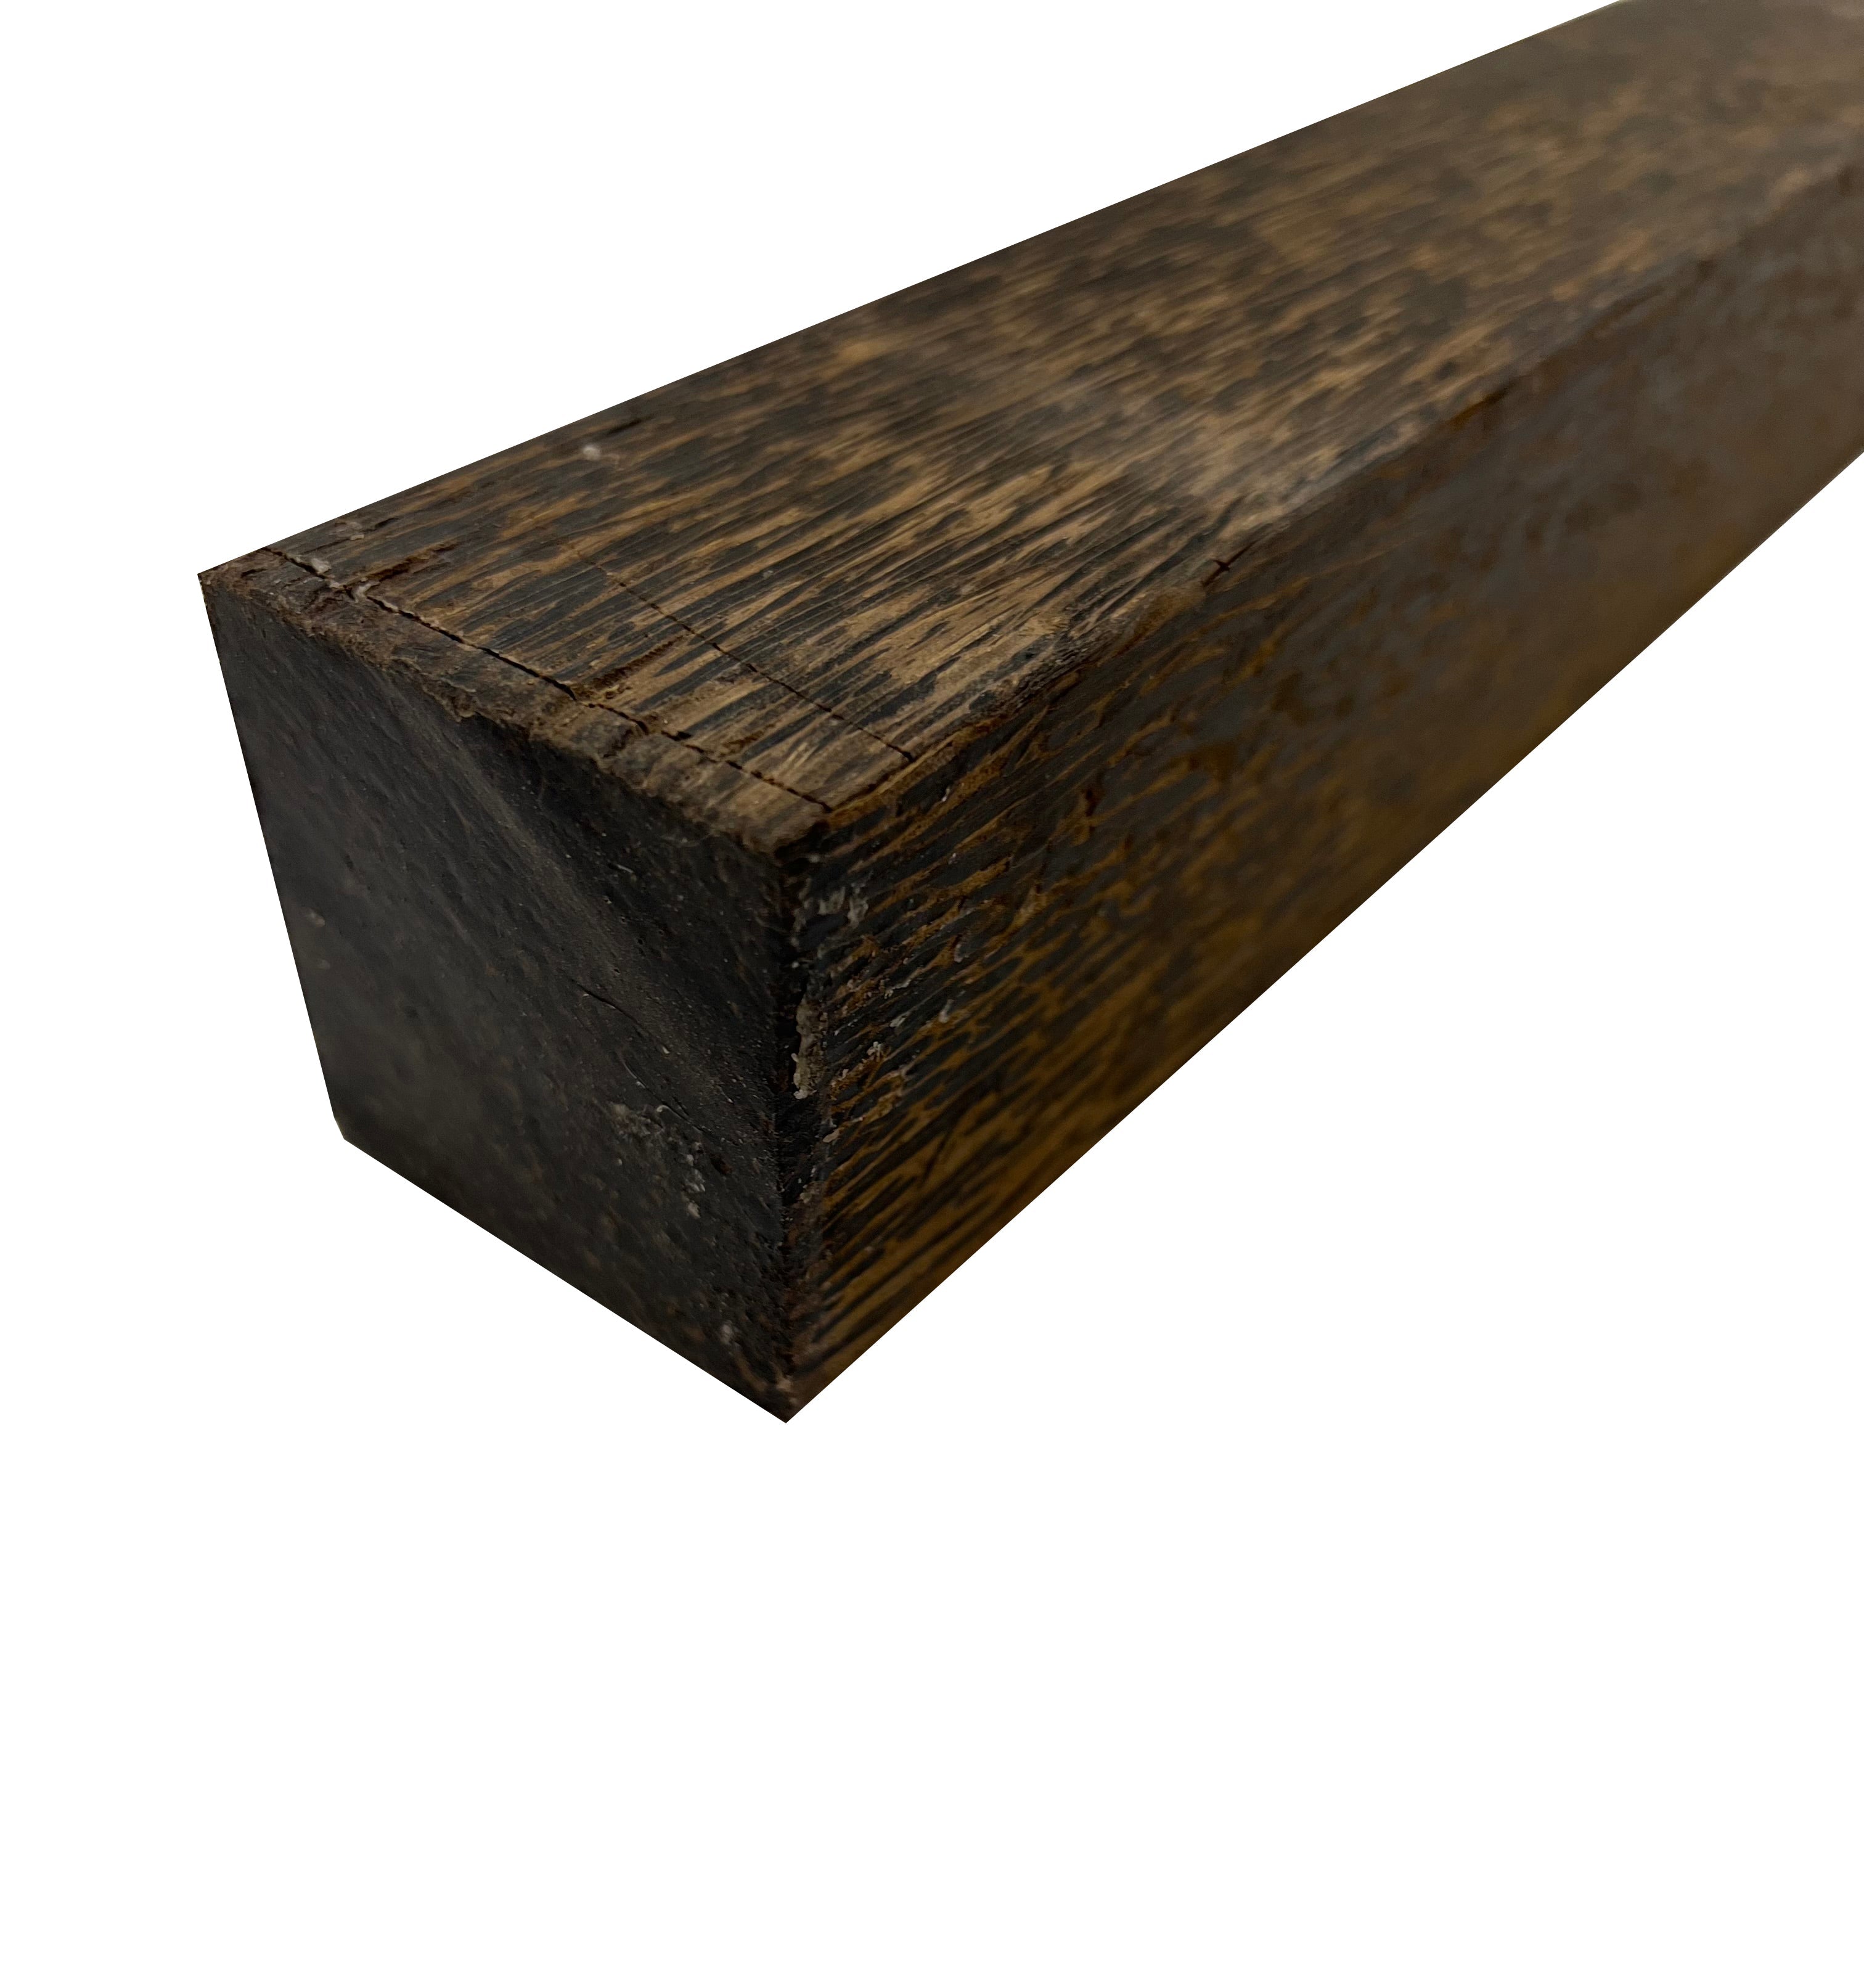 Pack Of 10, Black Palm Turning Blanks/Square Wood Blocks 18&quot; x 2&quot; x 2&quot; - Exotic Wood Zone - Buy online Across USA 